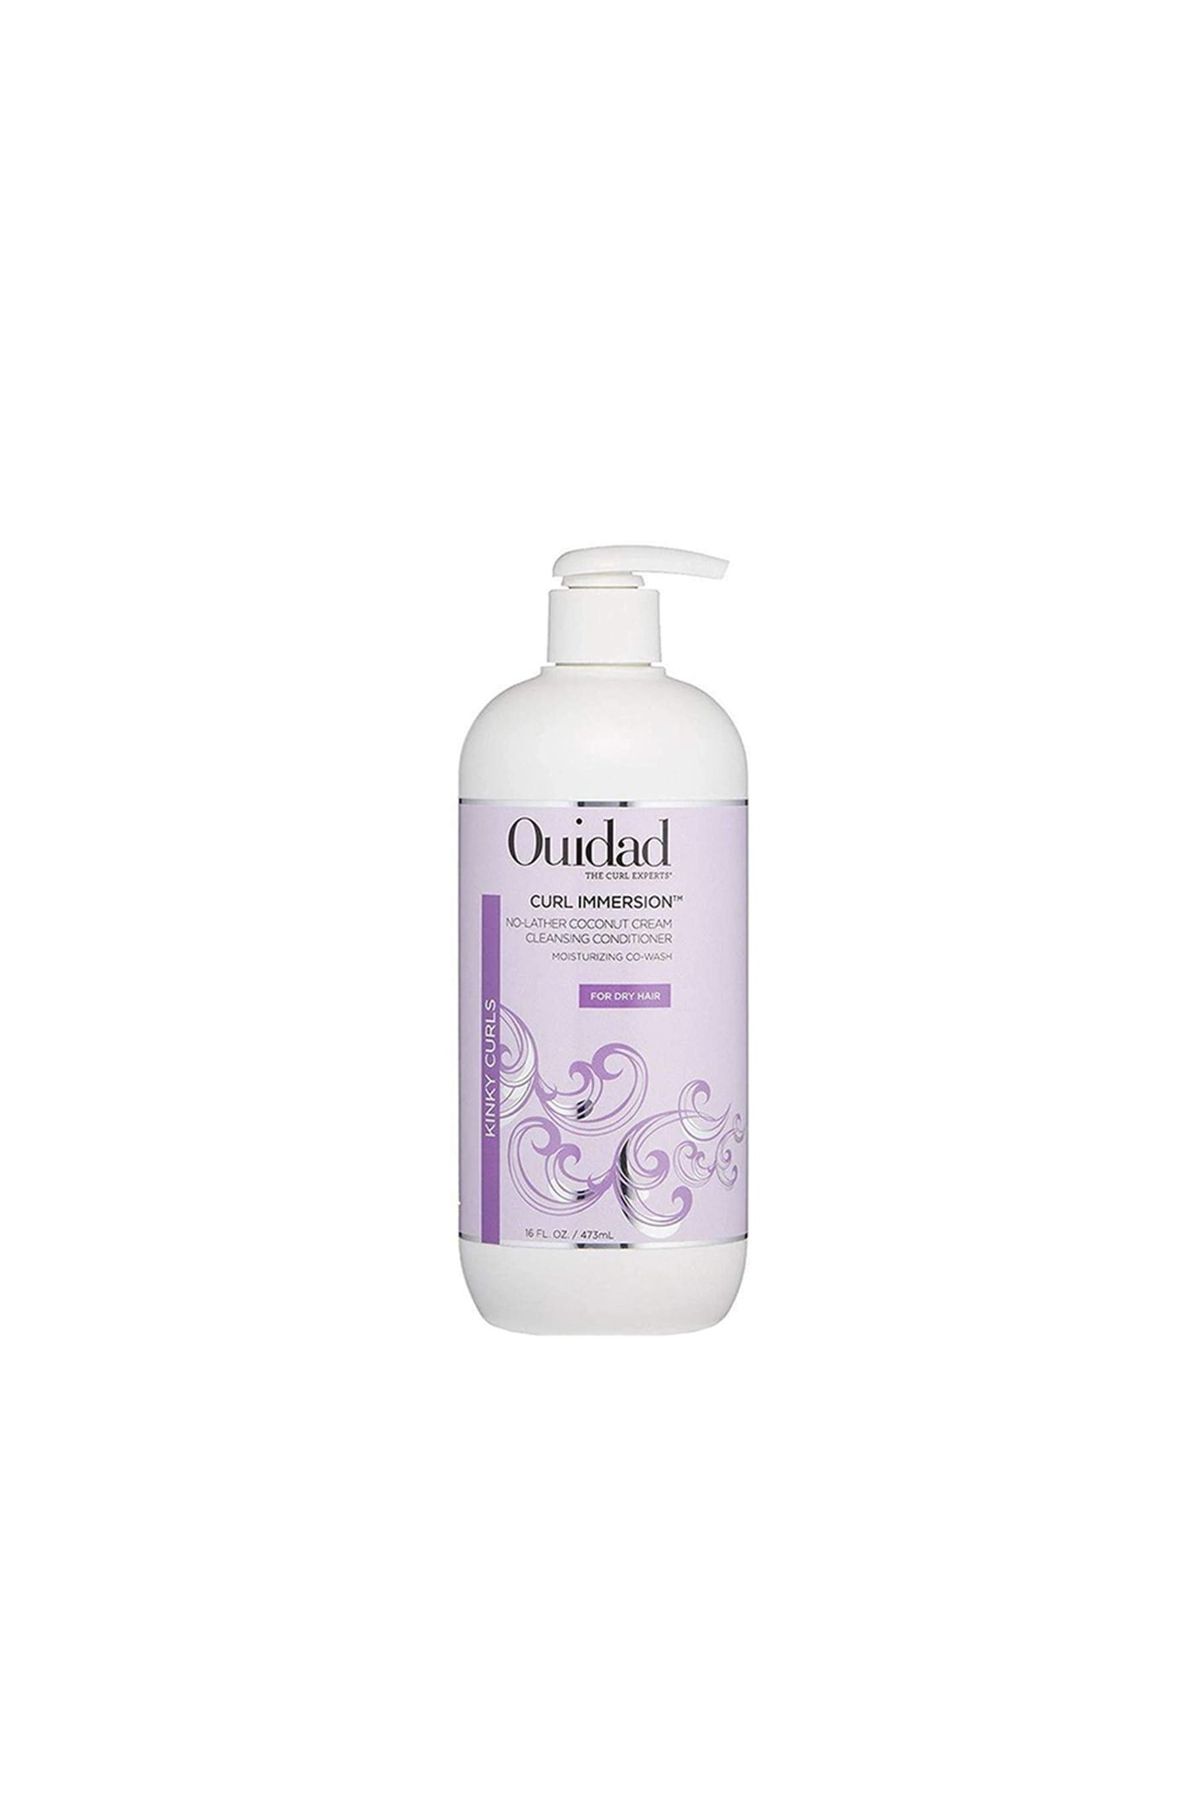 OUIDAD - CURL IMMERSION NO-LATHER COCONUT CREAM CLEANSING CONDITIONER (475 ML)